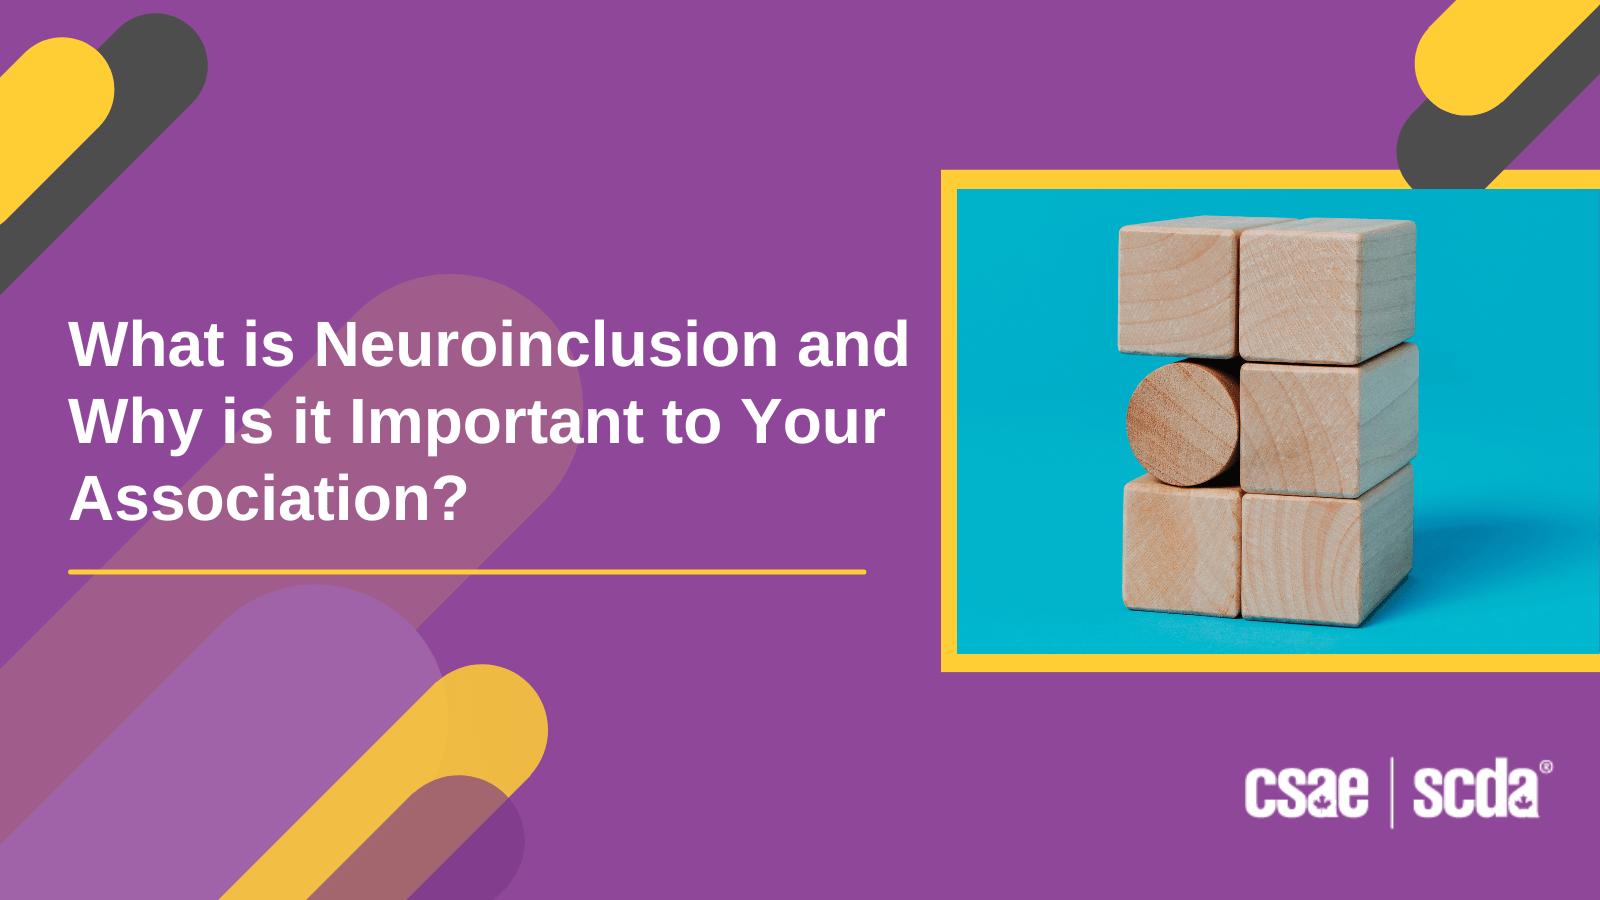 What is Neuroinclusion and Why is it Important to Your Association?